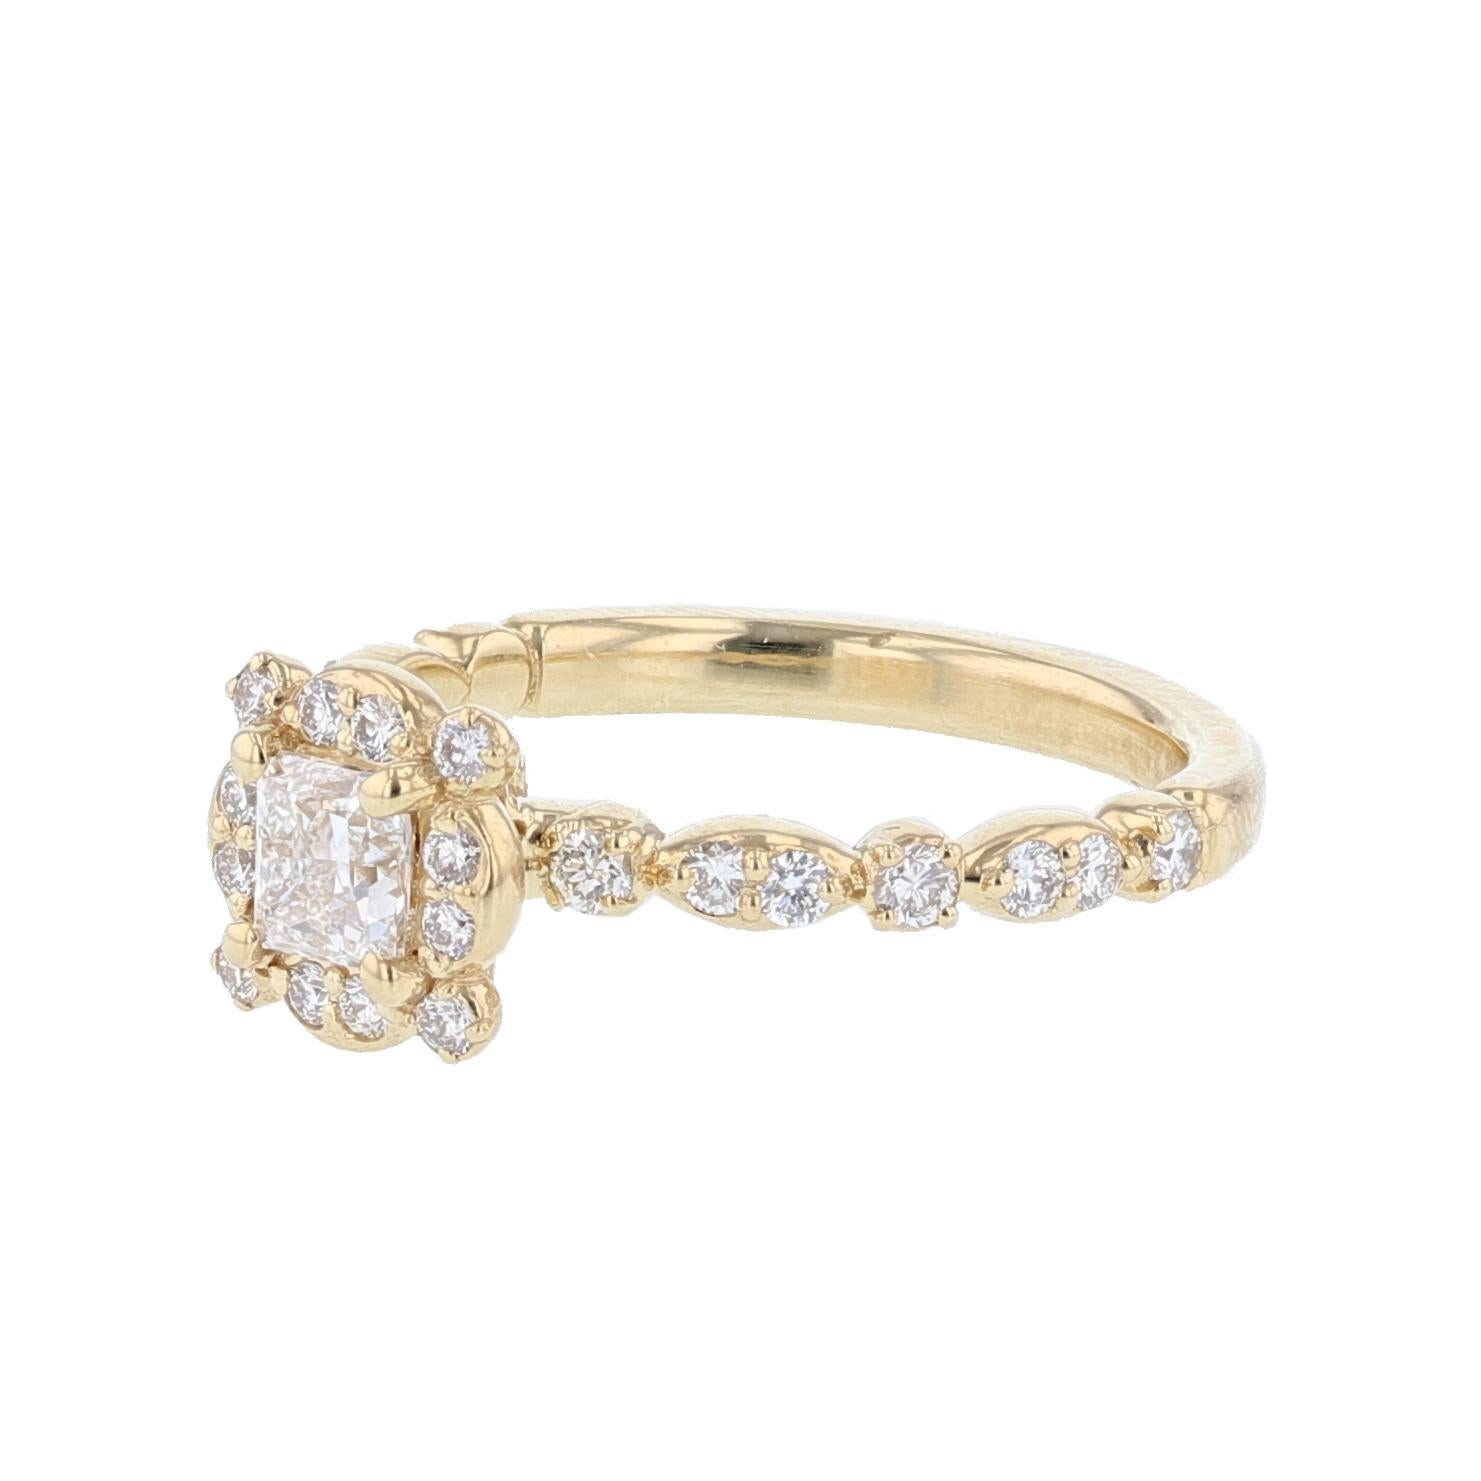 This ring is made with 14 karat yellow gold and features a prong set  0.46ct  EGL certified princess cut diamond (EGL Certificate number: 69876809D ), with a color grade (D) and clarity grade (SI1) and is surrounded by 56 round cut diamonds weighing